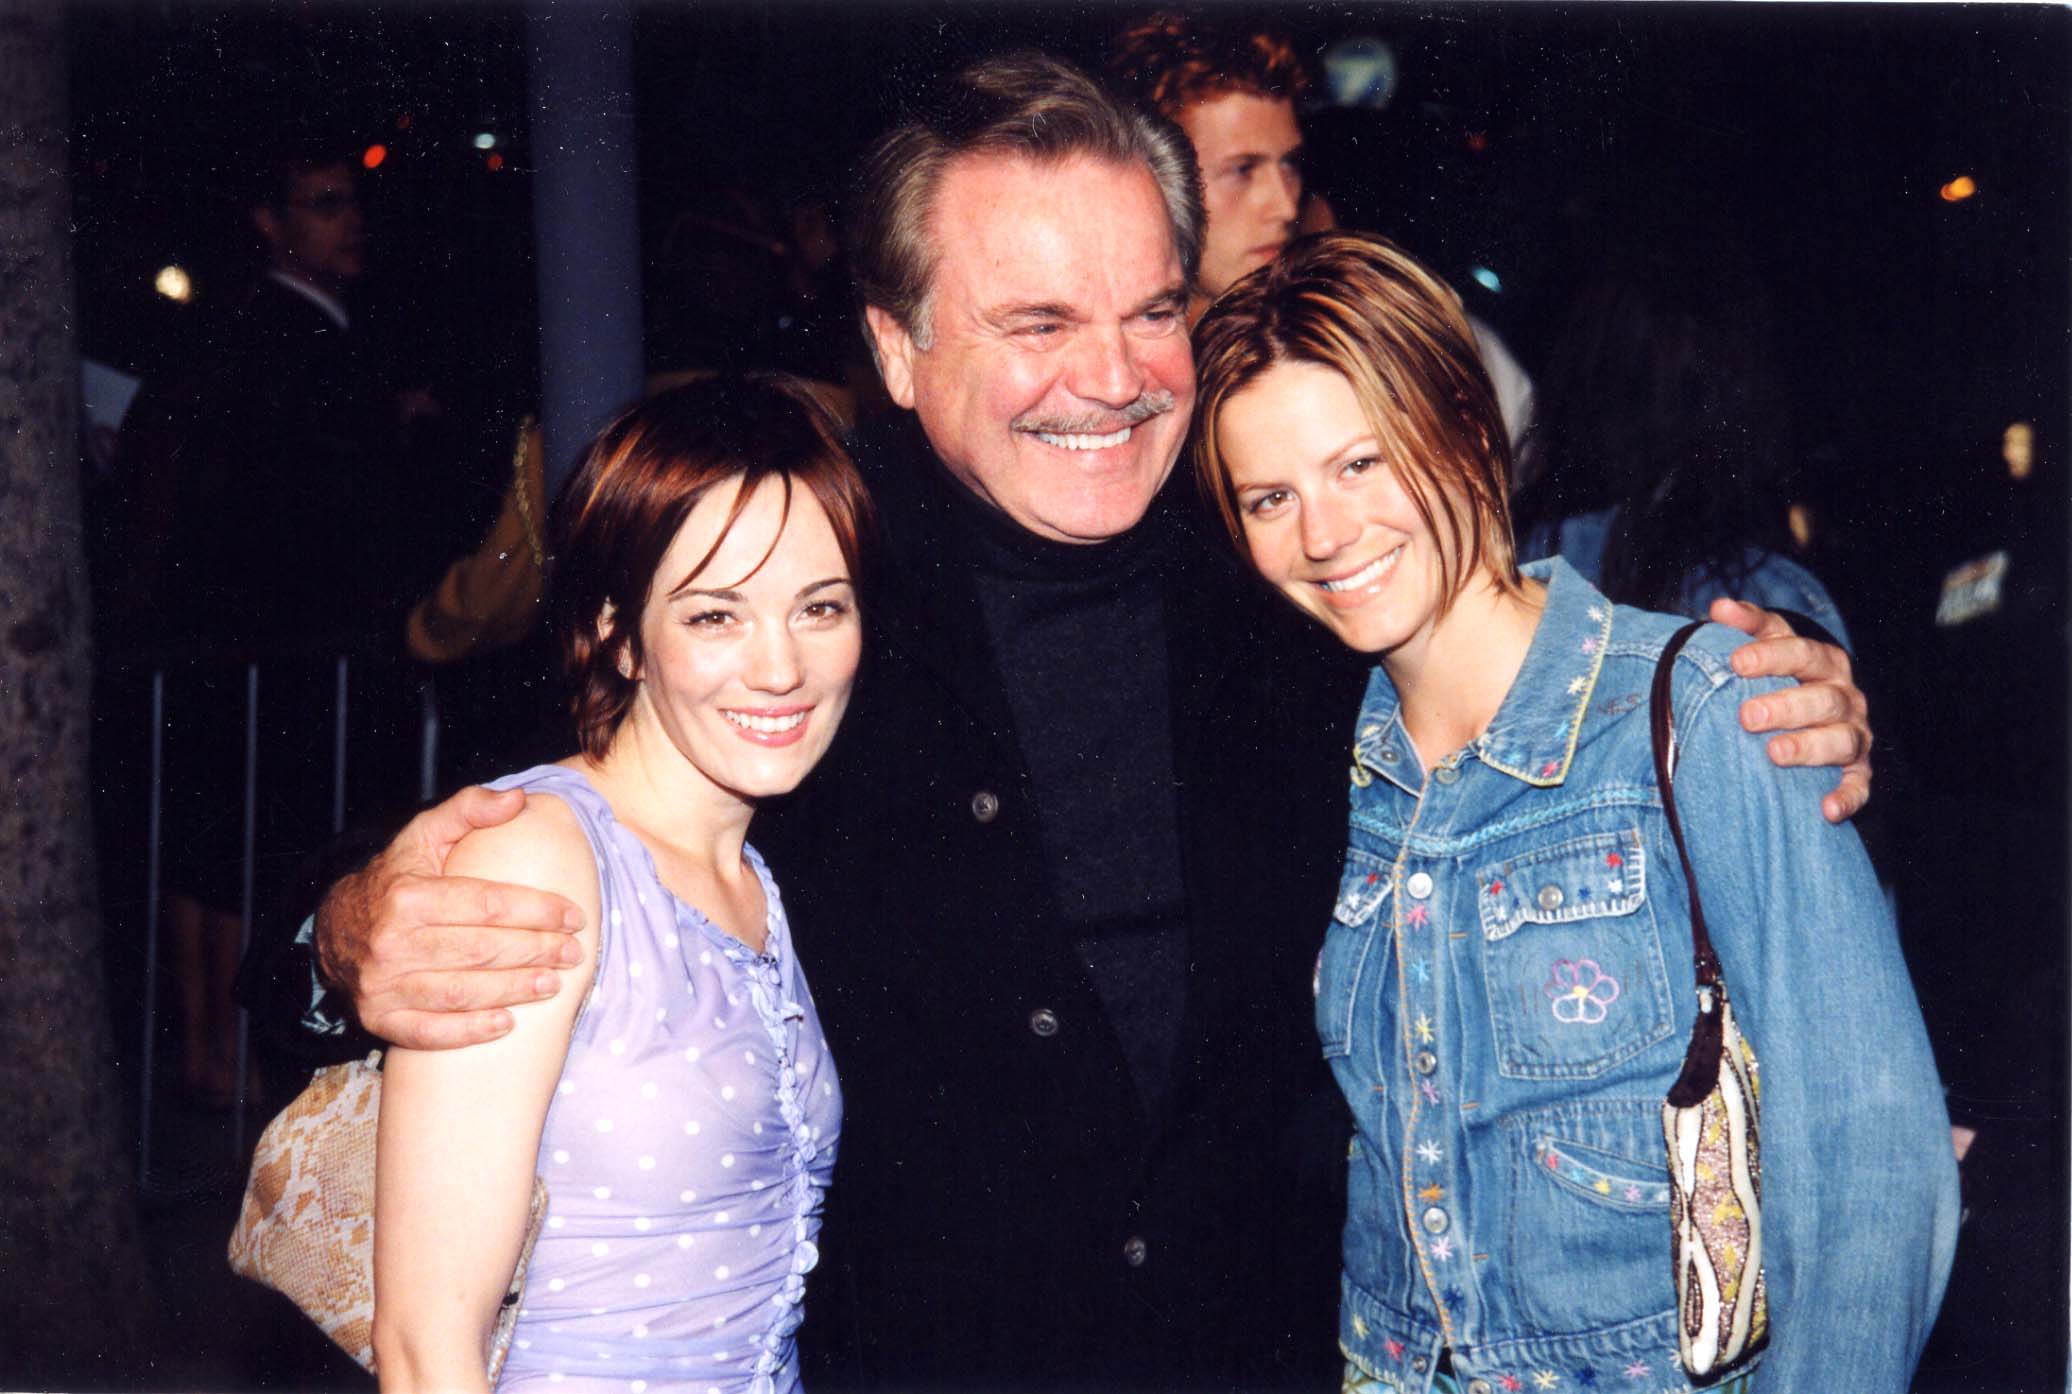 Natasha Gregson Wagner, Robert Wagner, and Courtney Brooke Wagner during the "High Fidelity" premiere on March 28, 2000 ┃Source: Getty Images